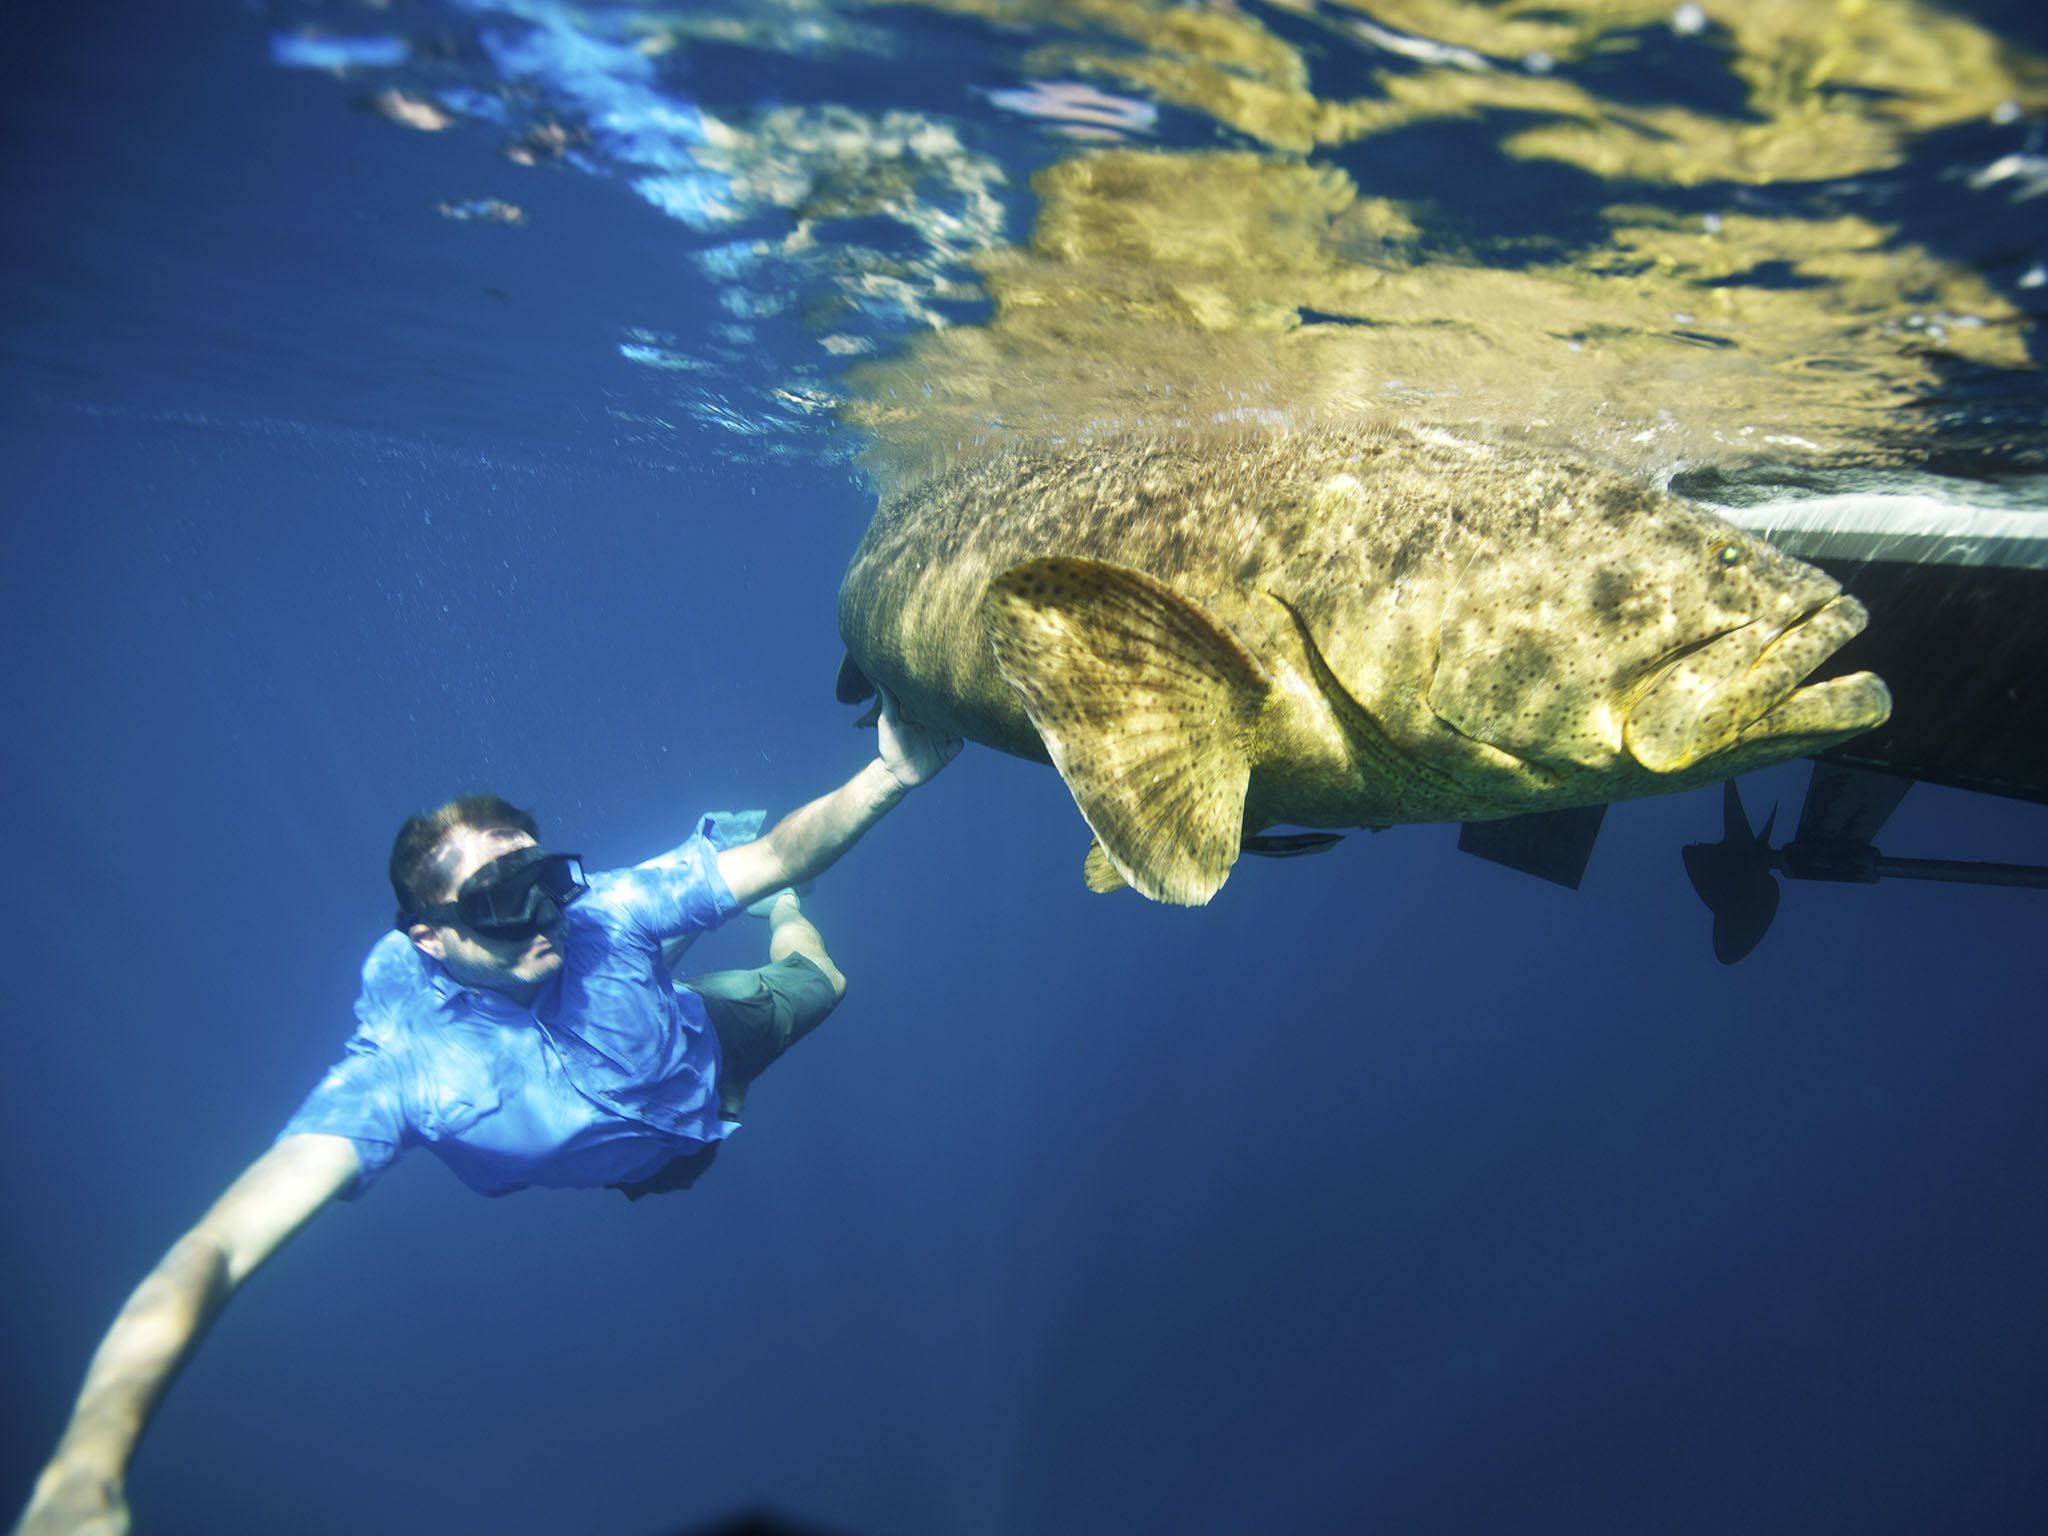 Fla.:  Zeb swims with a Goliath Grouper. The Goliath Grouper is listed as a Critically... [Photo of the day - April 2016]